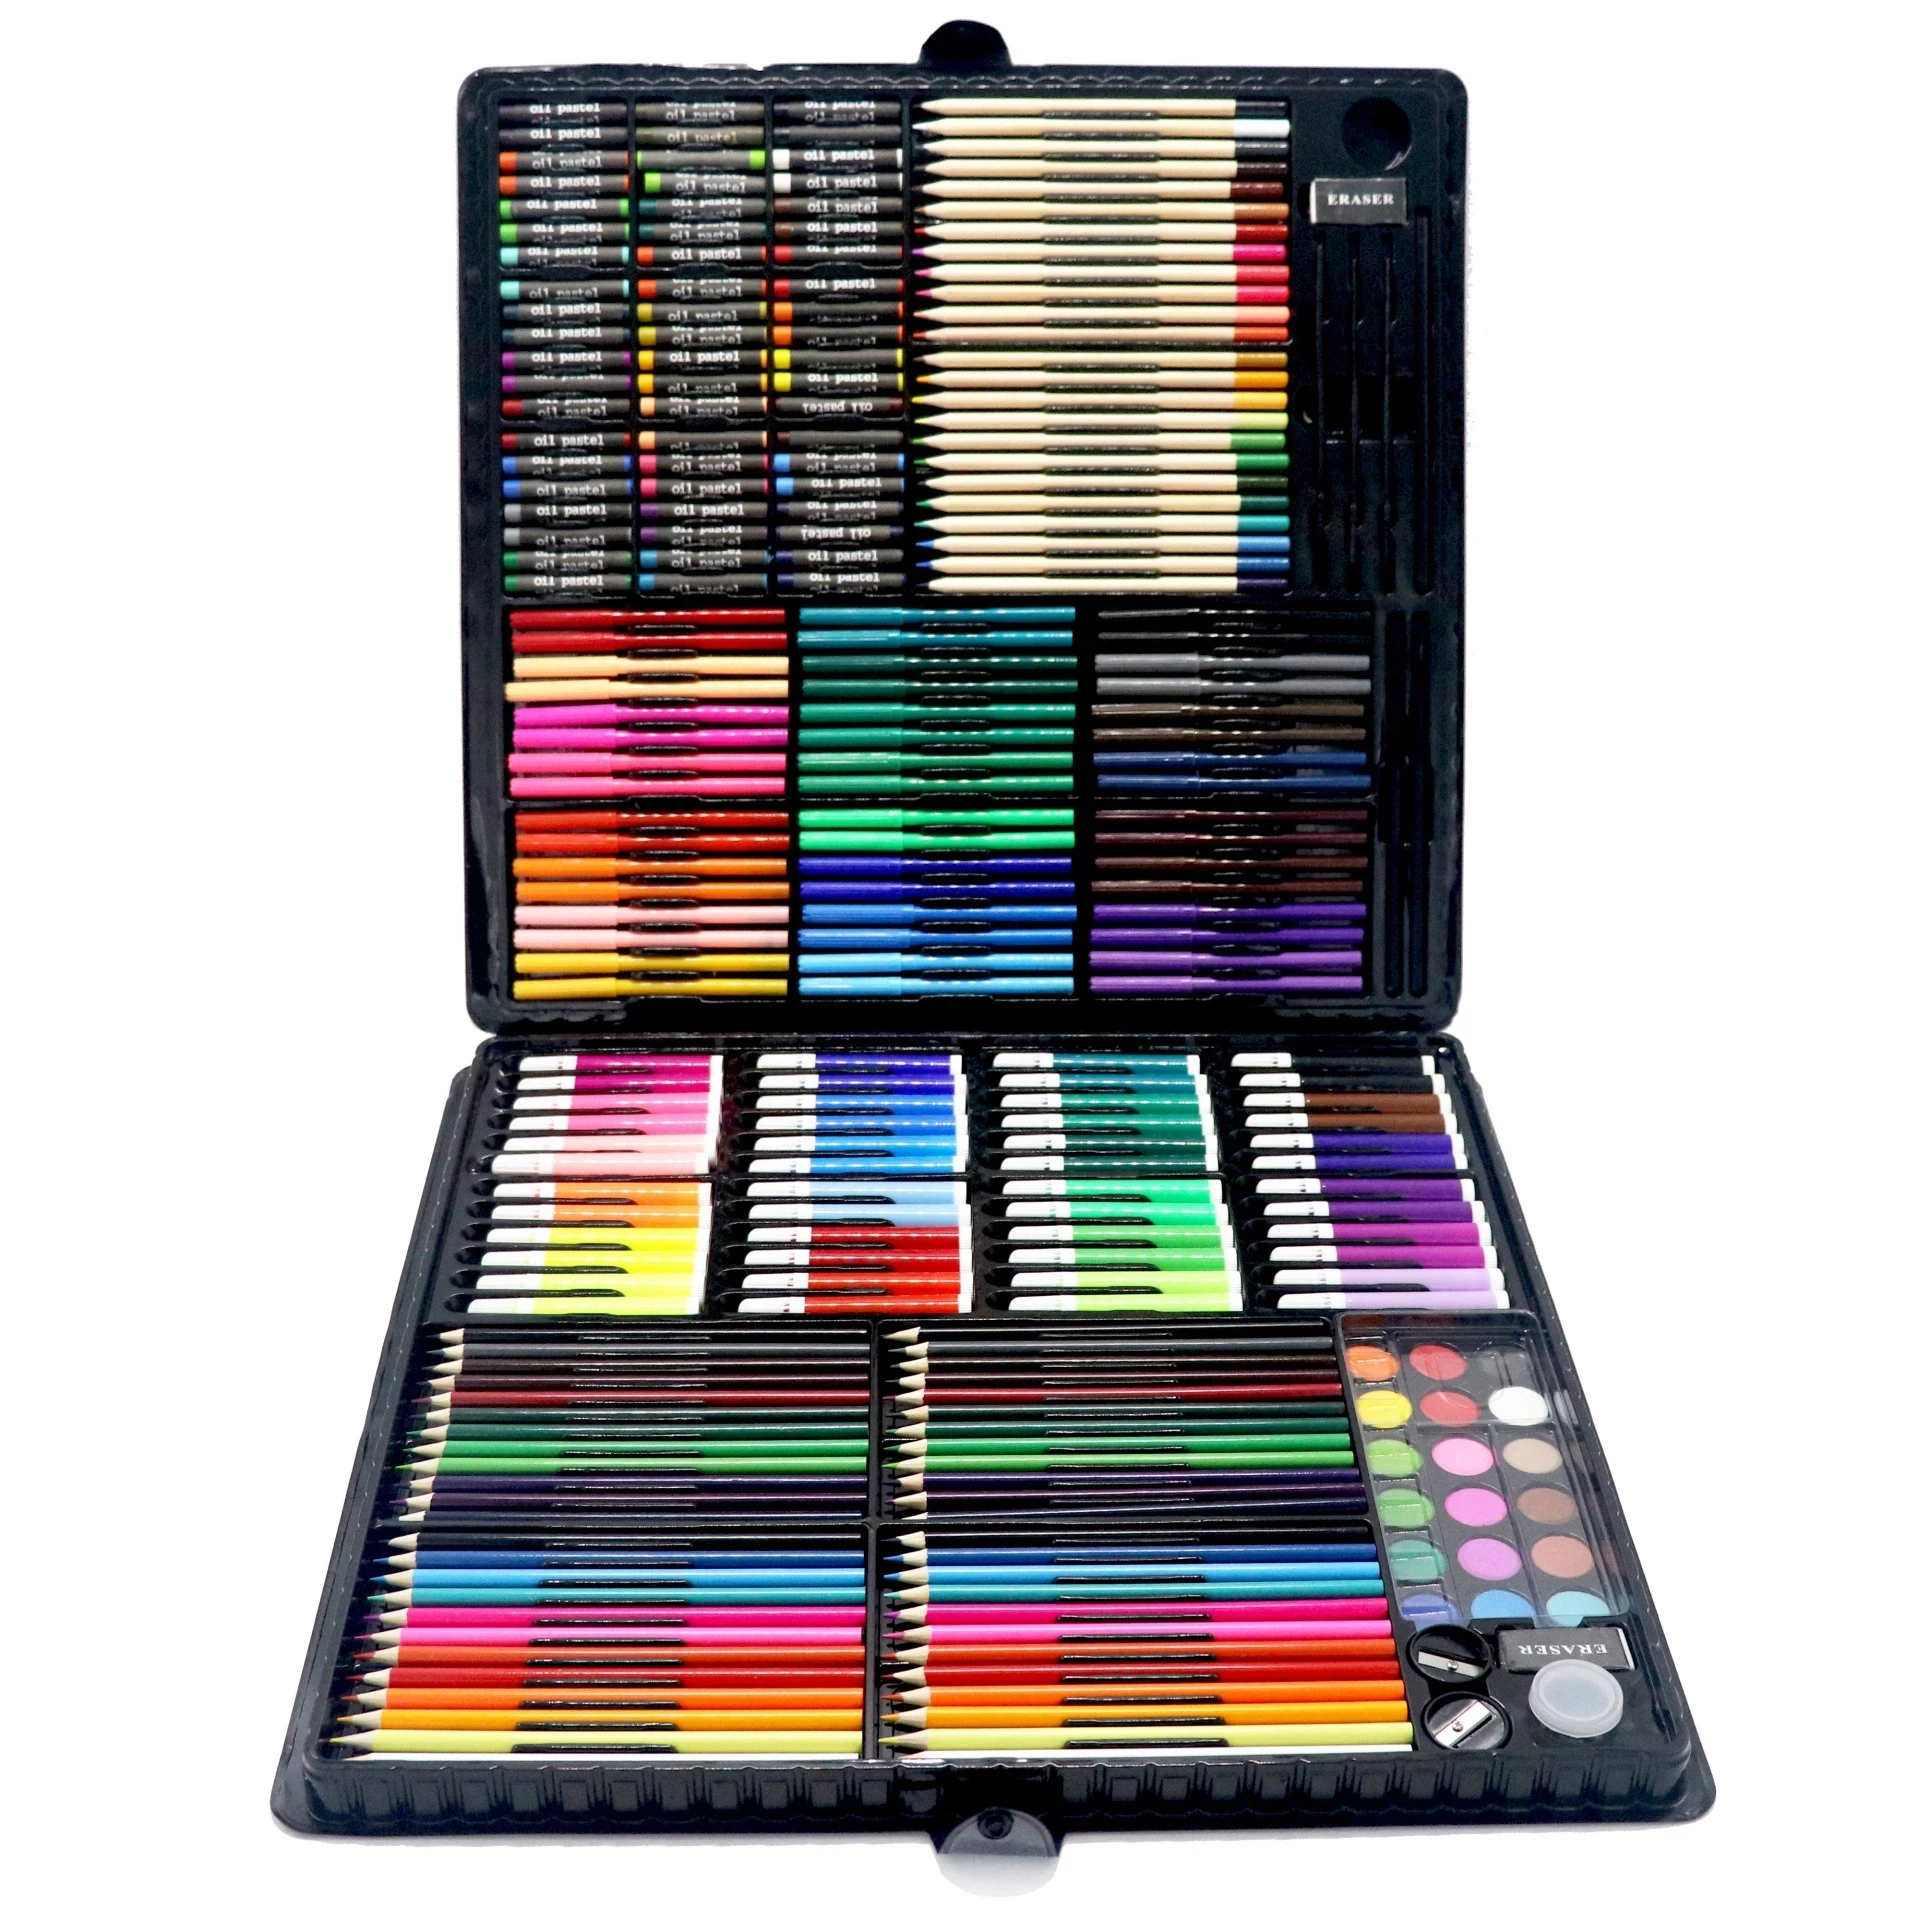 258 Pieces Super Large Art Kit,Kids Drawing Supplies Painting Set With Oil  Pastels,Crayons,Colored Pencils,Markers - Buy Drawing Art Set,258 Painting